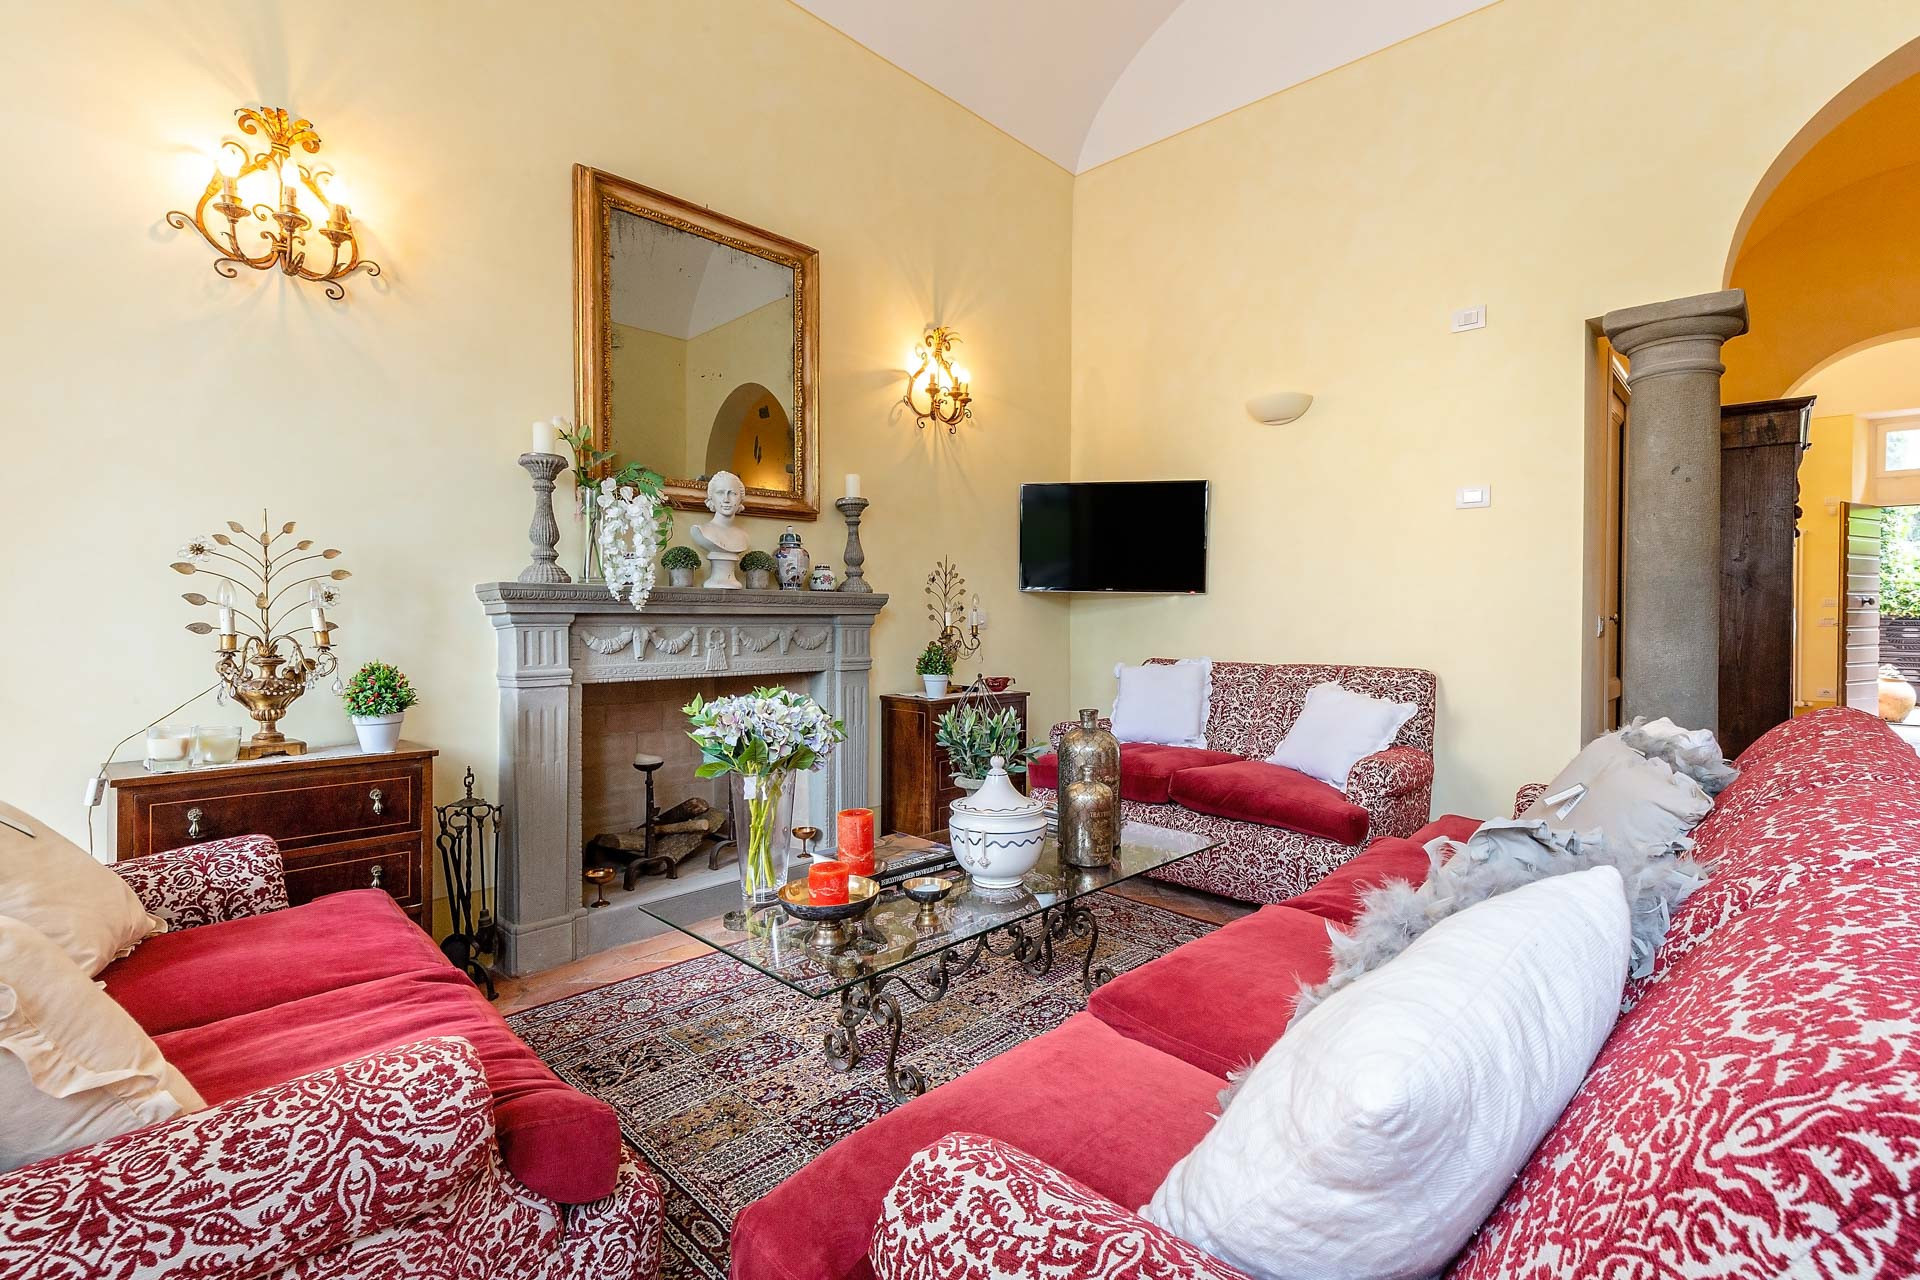  in Lucca - Spacious Ground Floor Apartment with Private Garden Inside the Walls of Lucca